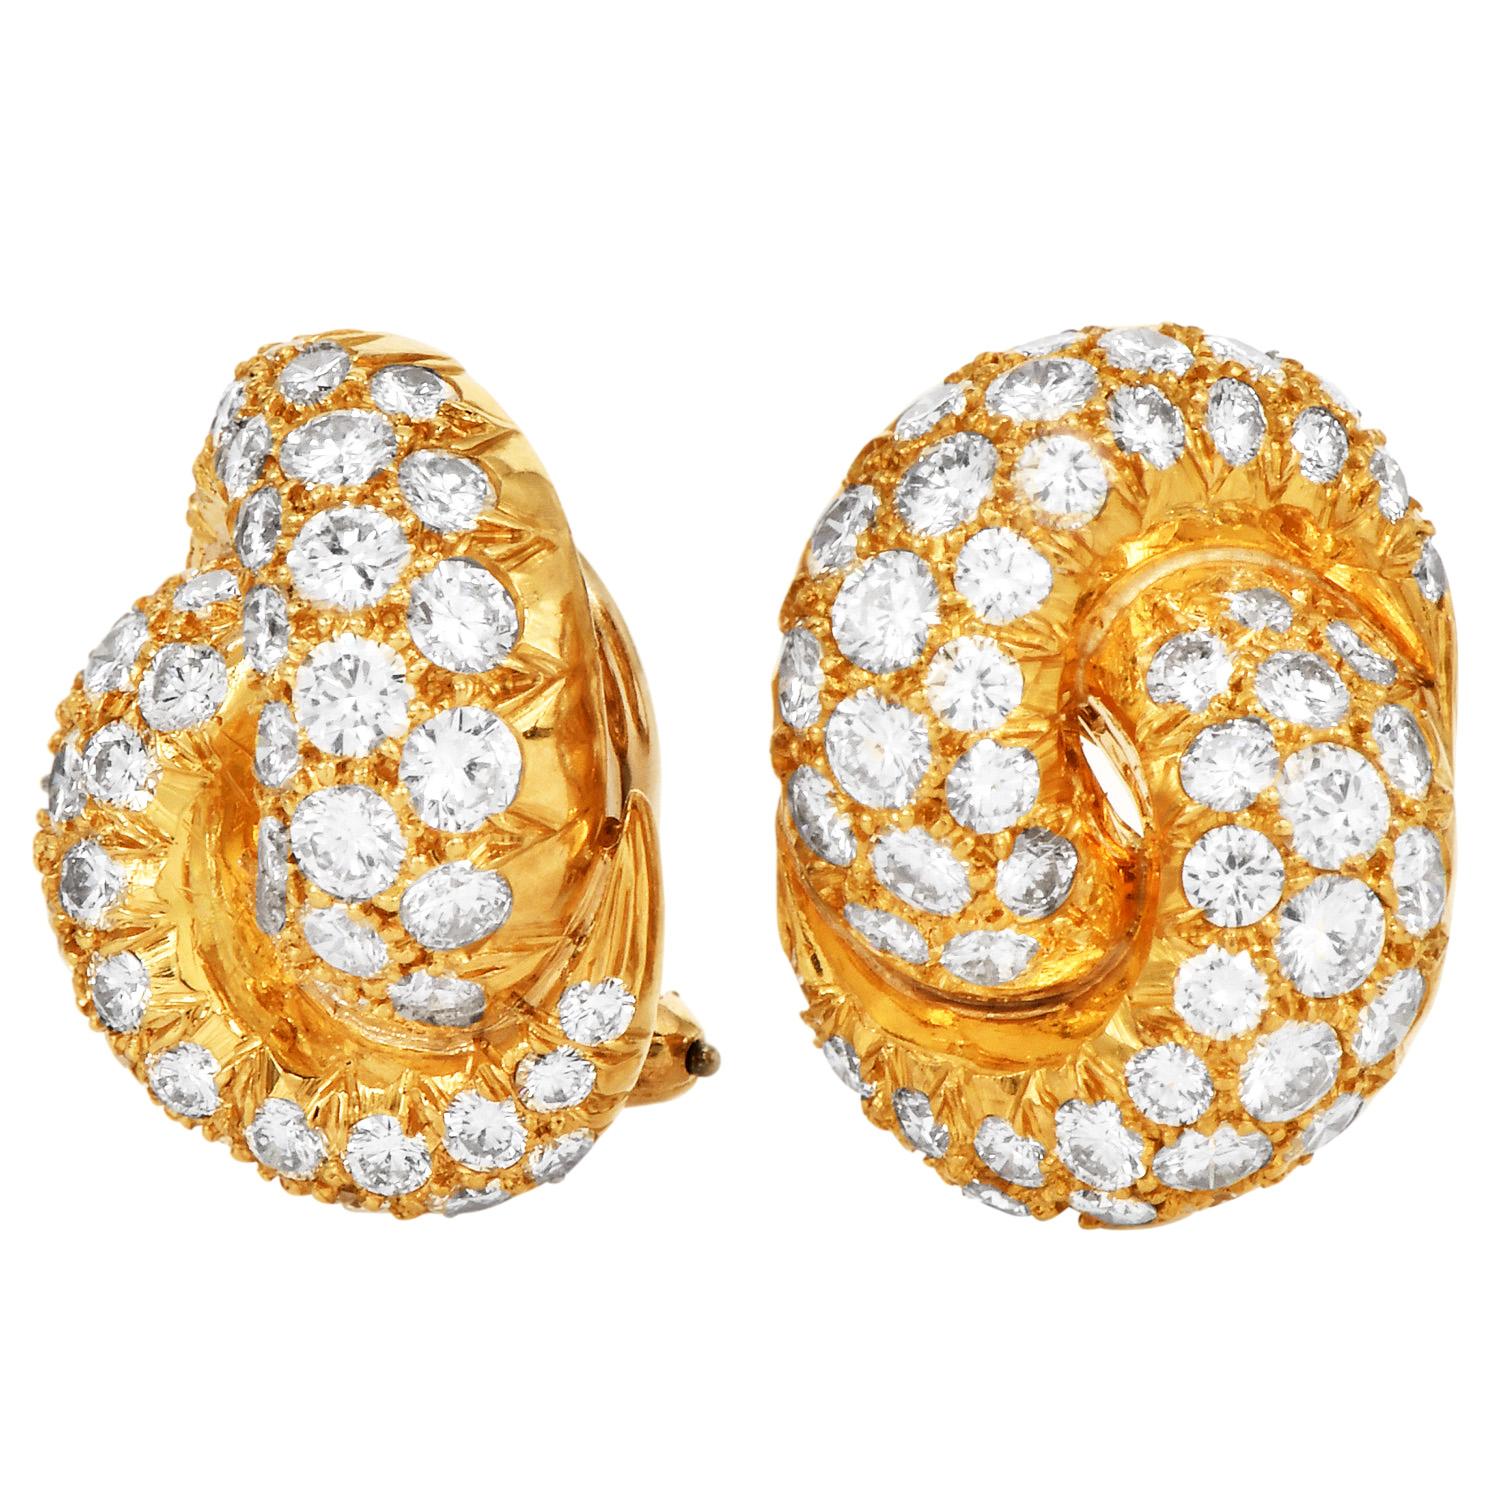 They are expertly crafted in solid 18-karat gold. Their design features an interplay of intertwined loops, each set with natural brilliant round diamonds. Boasting 100 diamonds totaling approximately 4.5 carats VS1-VS2 clarity with a G-H color pave